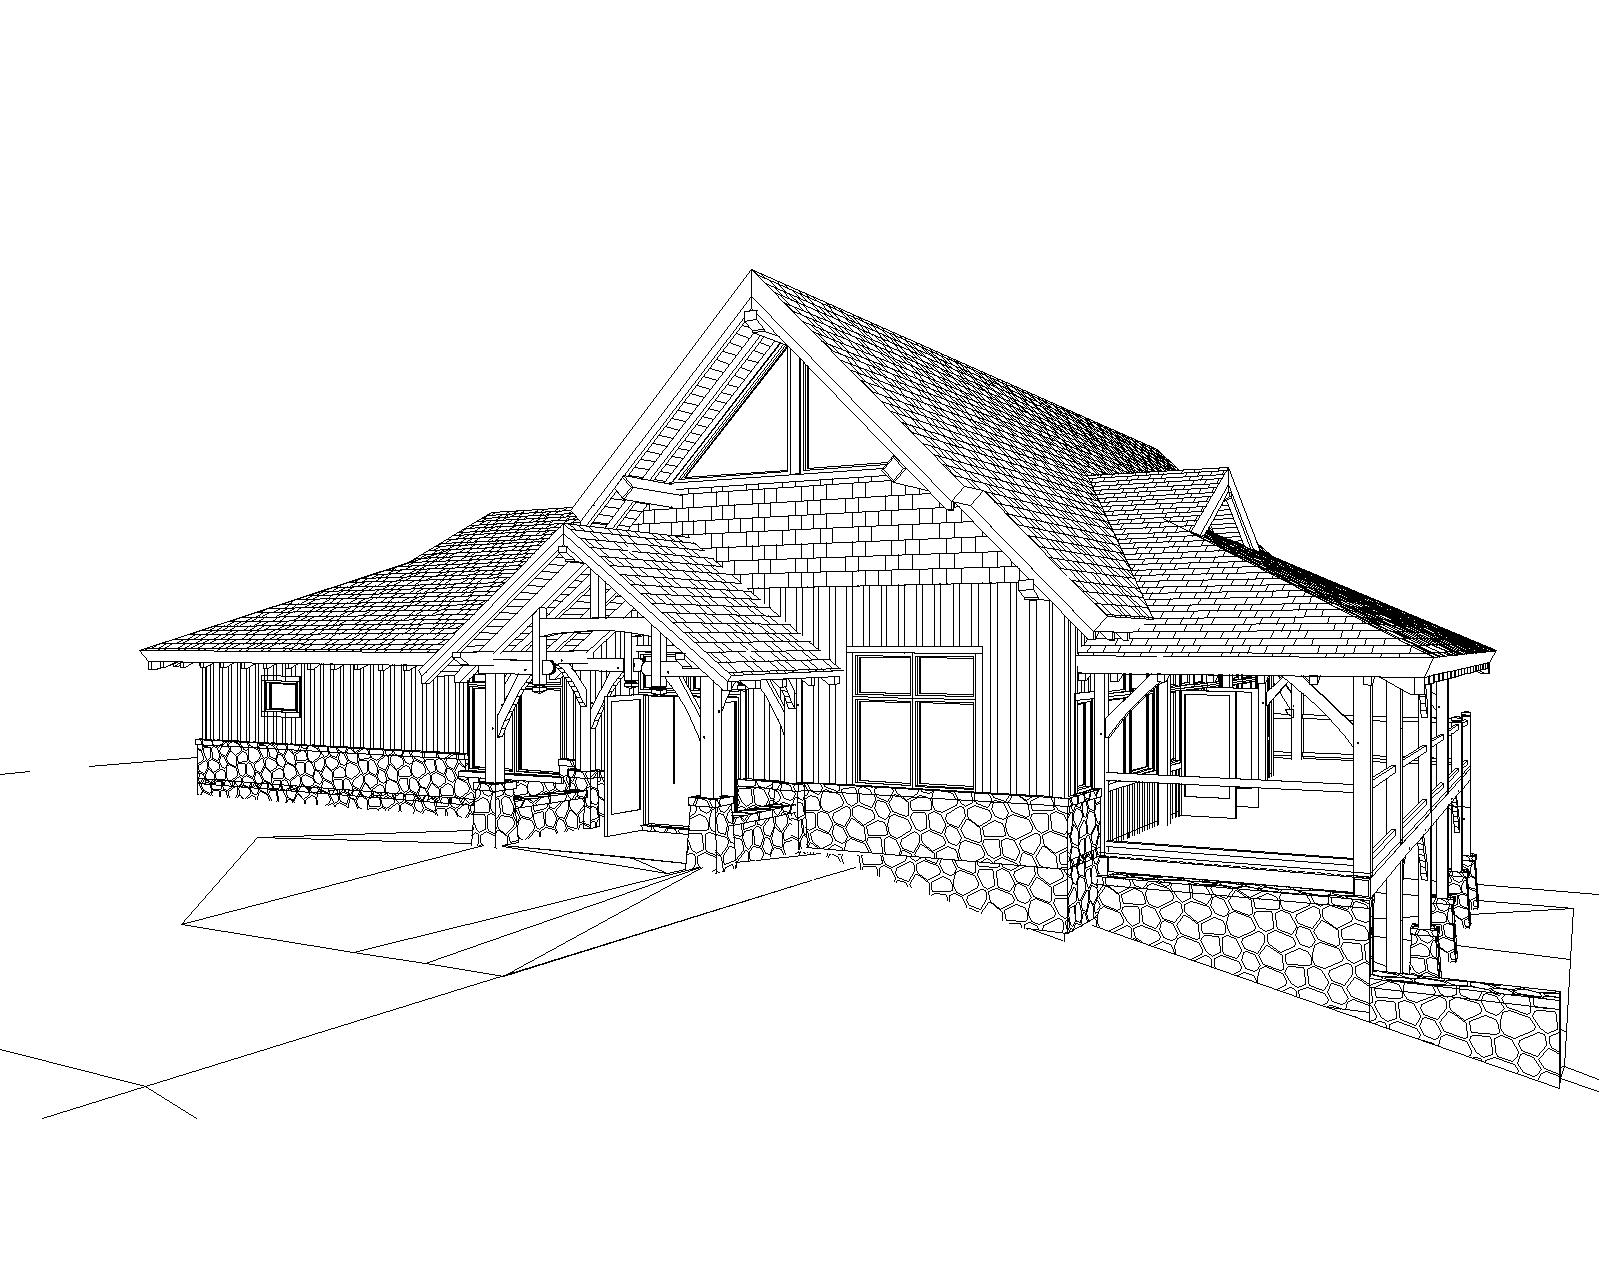 Timber Frame Design Questionaire | Hamill Creek - Once we have engaged the DDC, we will provide you with a Timber Frame Design  Questionnaire for your custom timber home.